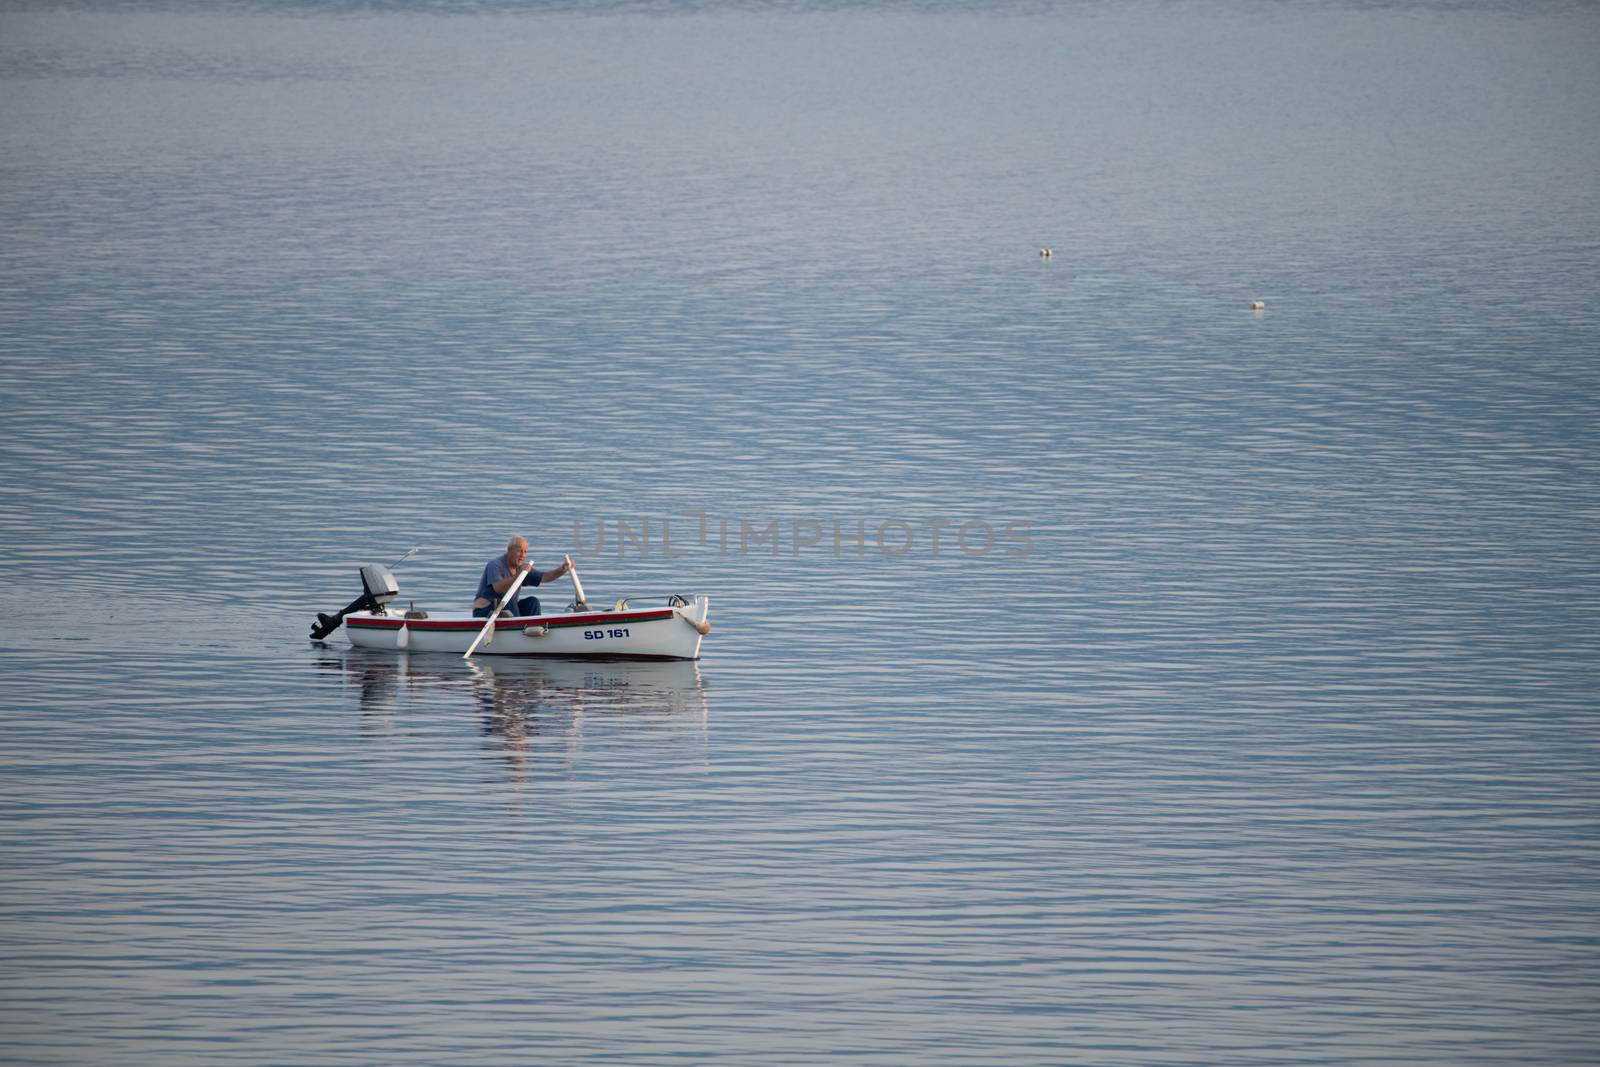 Old traditional fisherman in Croatia on a small wooden boat back into the harbor early morning by asafaric